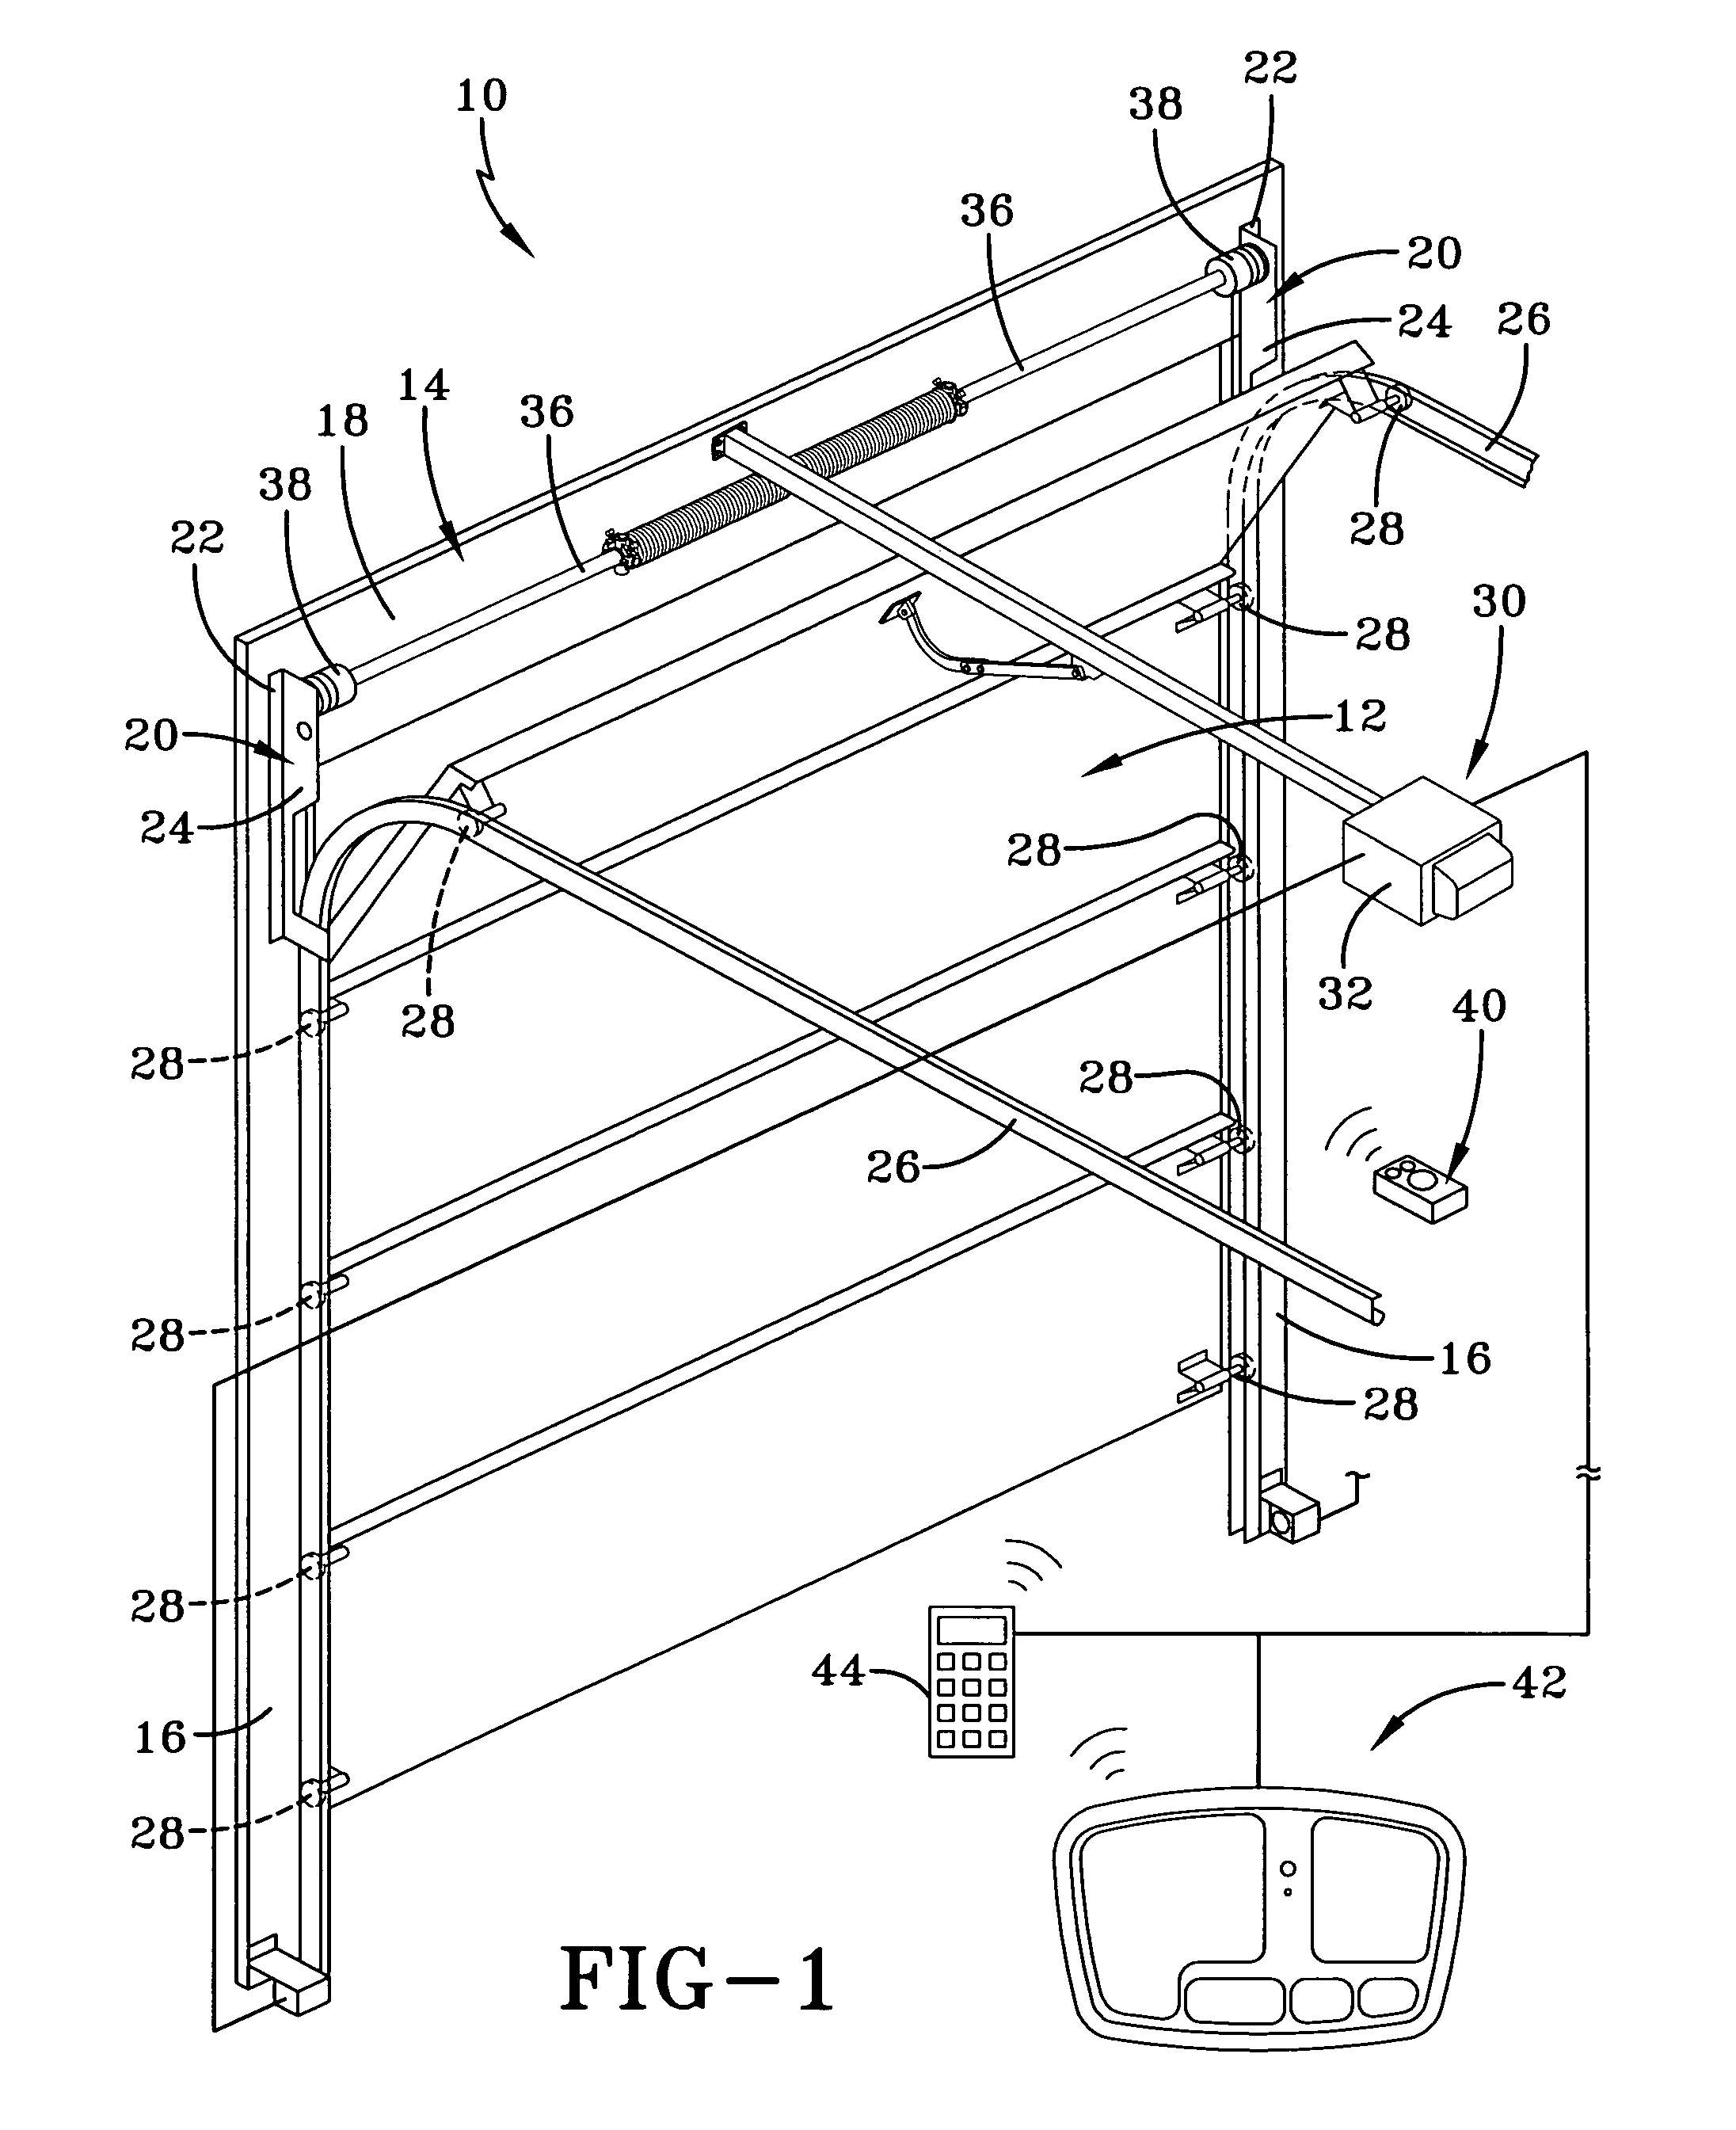 Motorized barrier operator system for setting a down force adjustment to a minimum value and method for programming the same